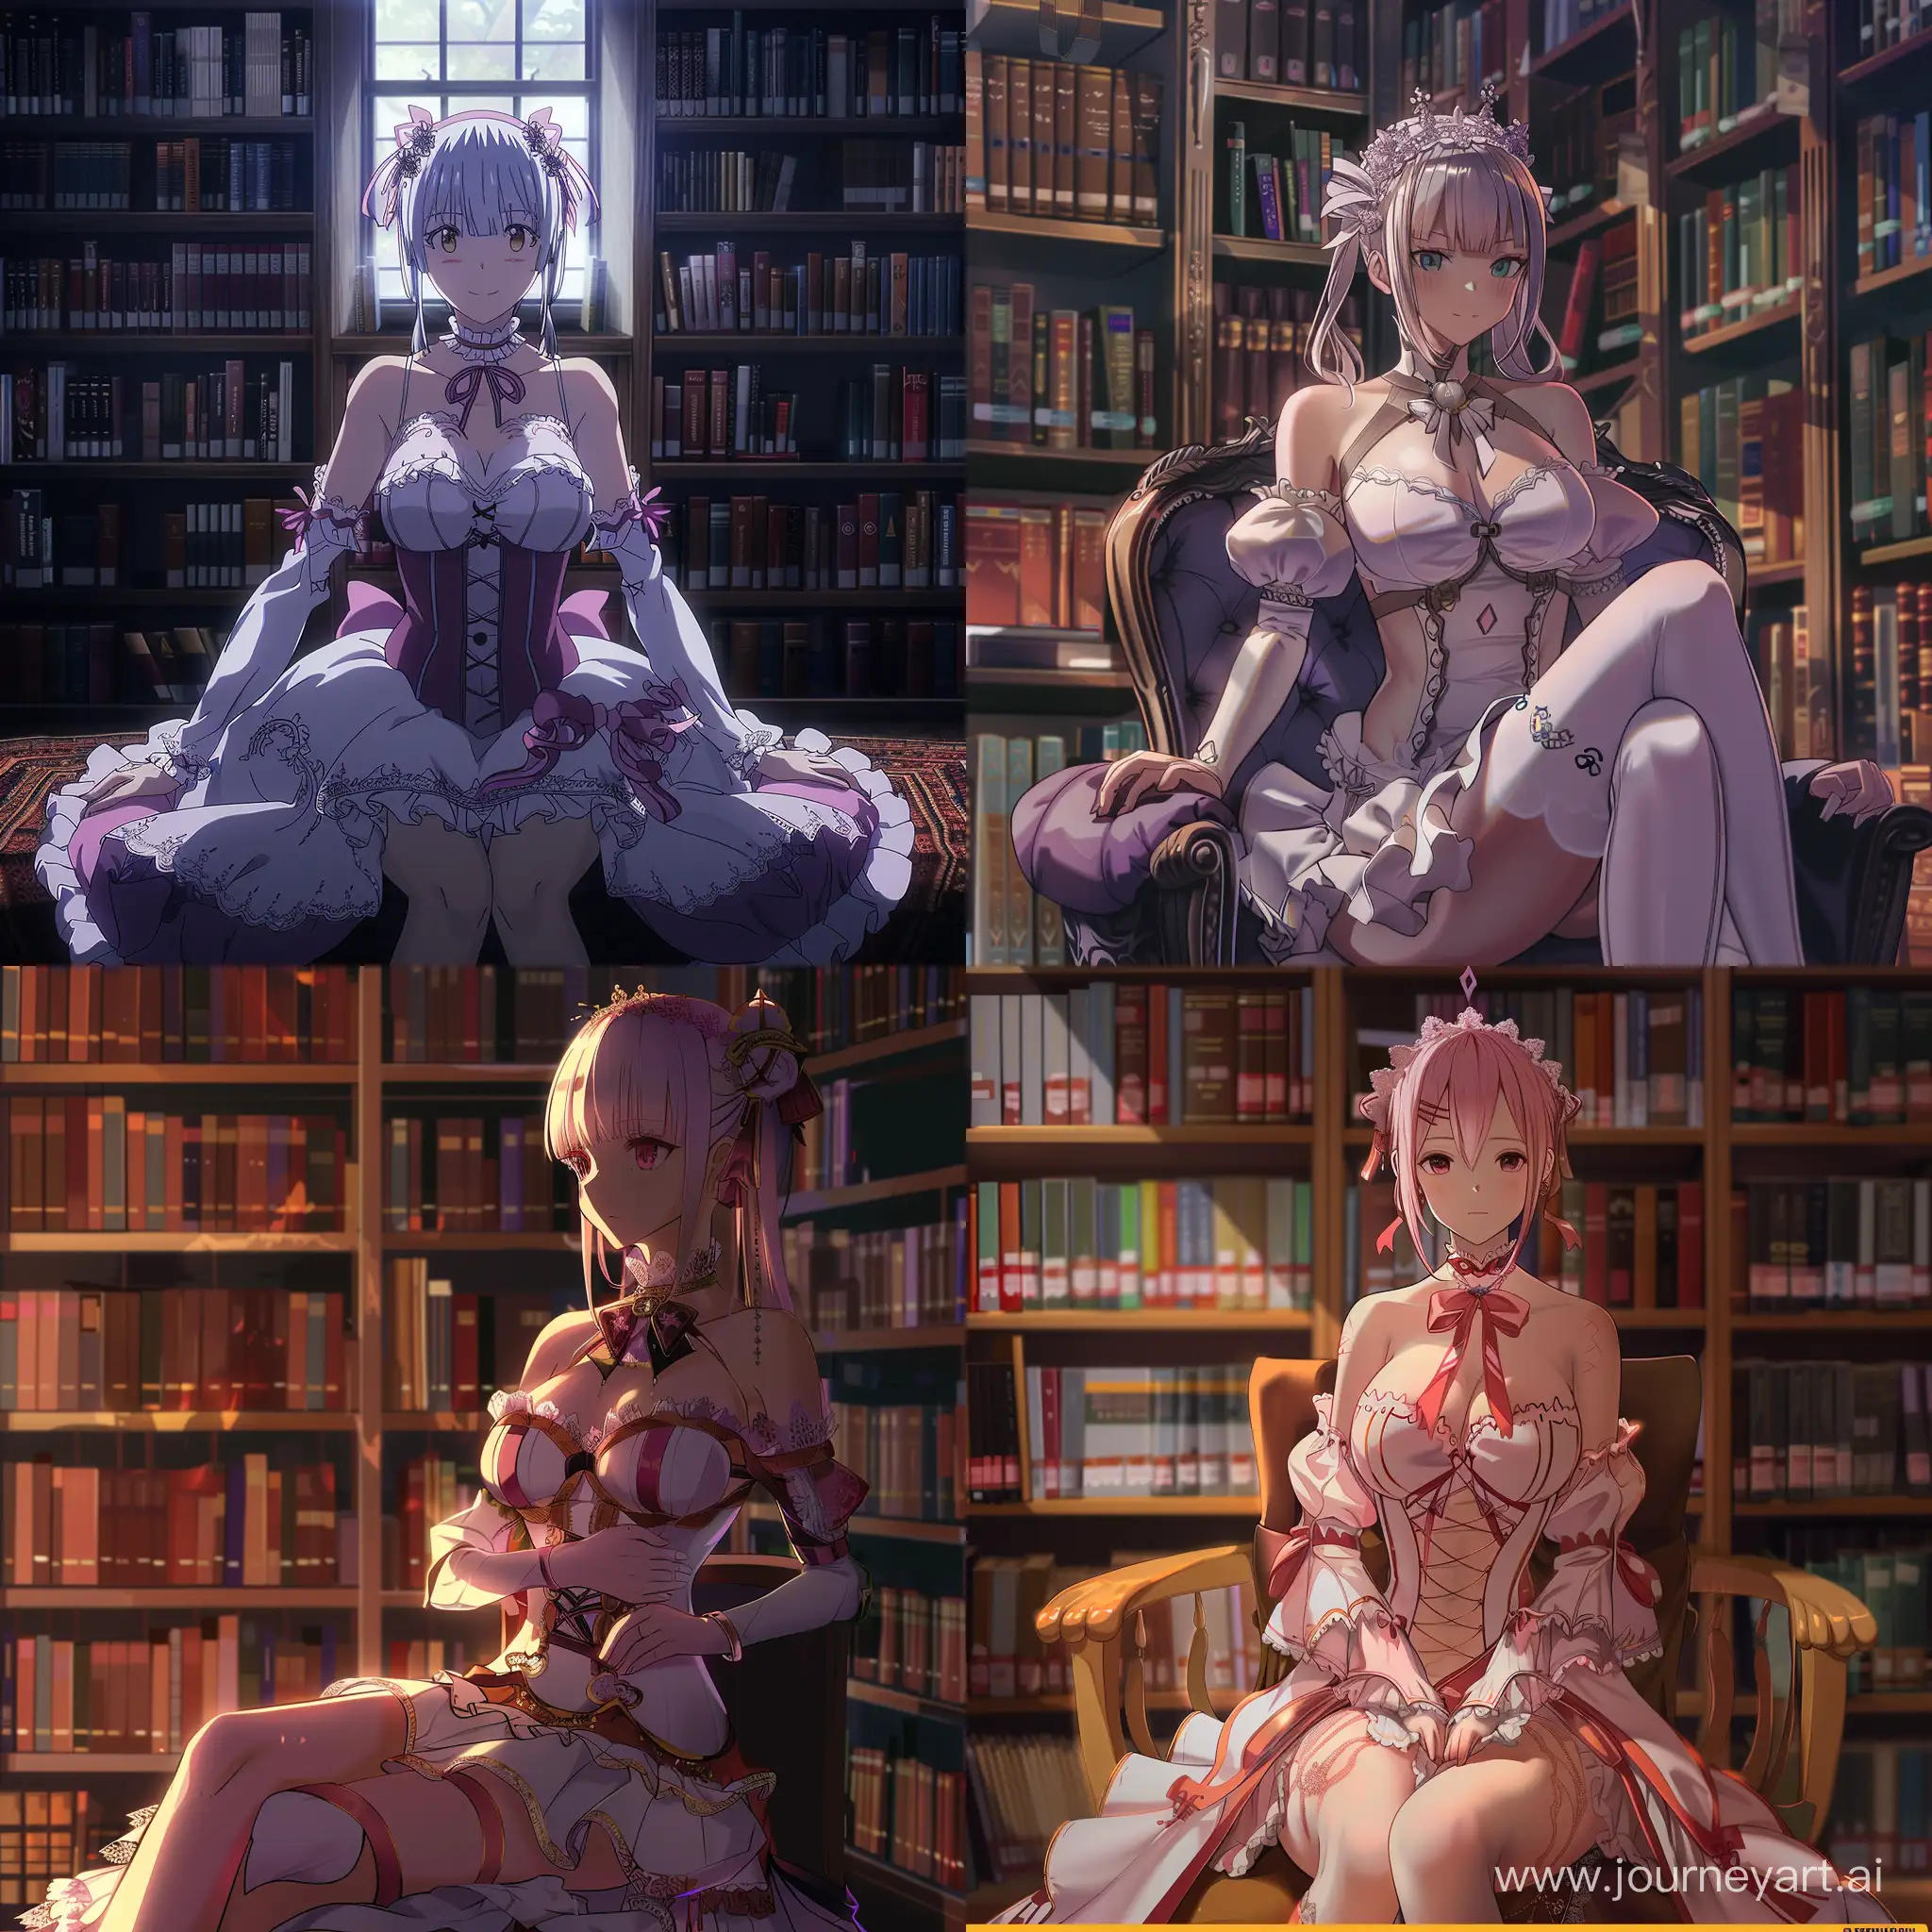 beatrice, re:zero, anime, in the library, beautiful dress, girl, sitting on the cheer